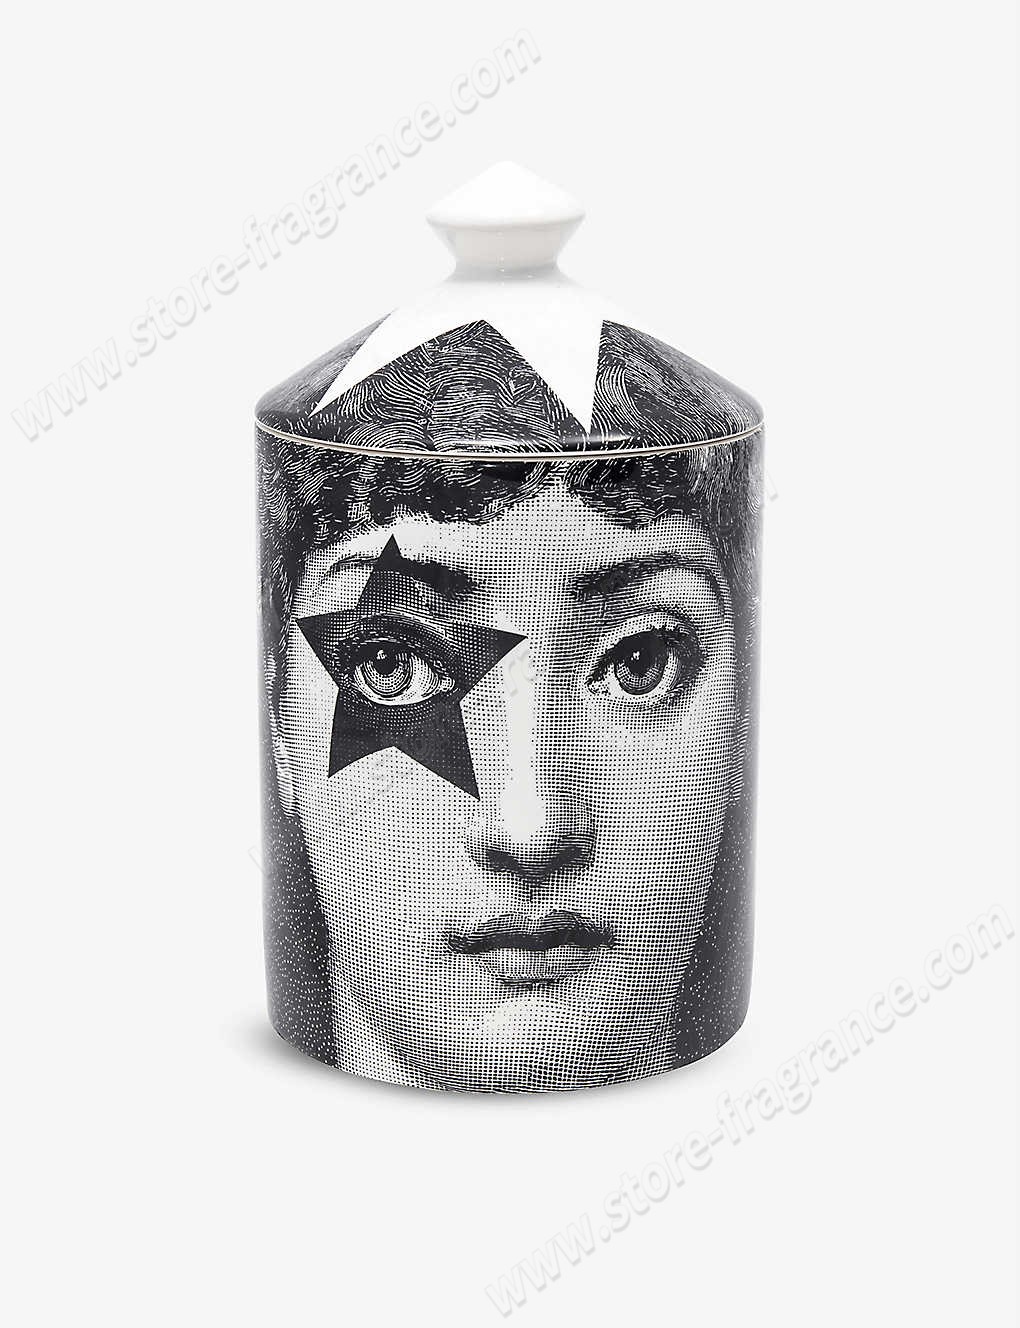 FORNASETTI/Star Lina scented candle 300g ✿ Discount Store - FORNASETTI/Star Lina scented candle 300g ✿ Discount Store